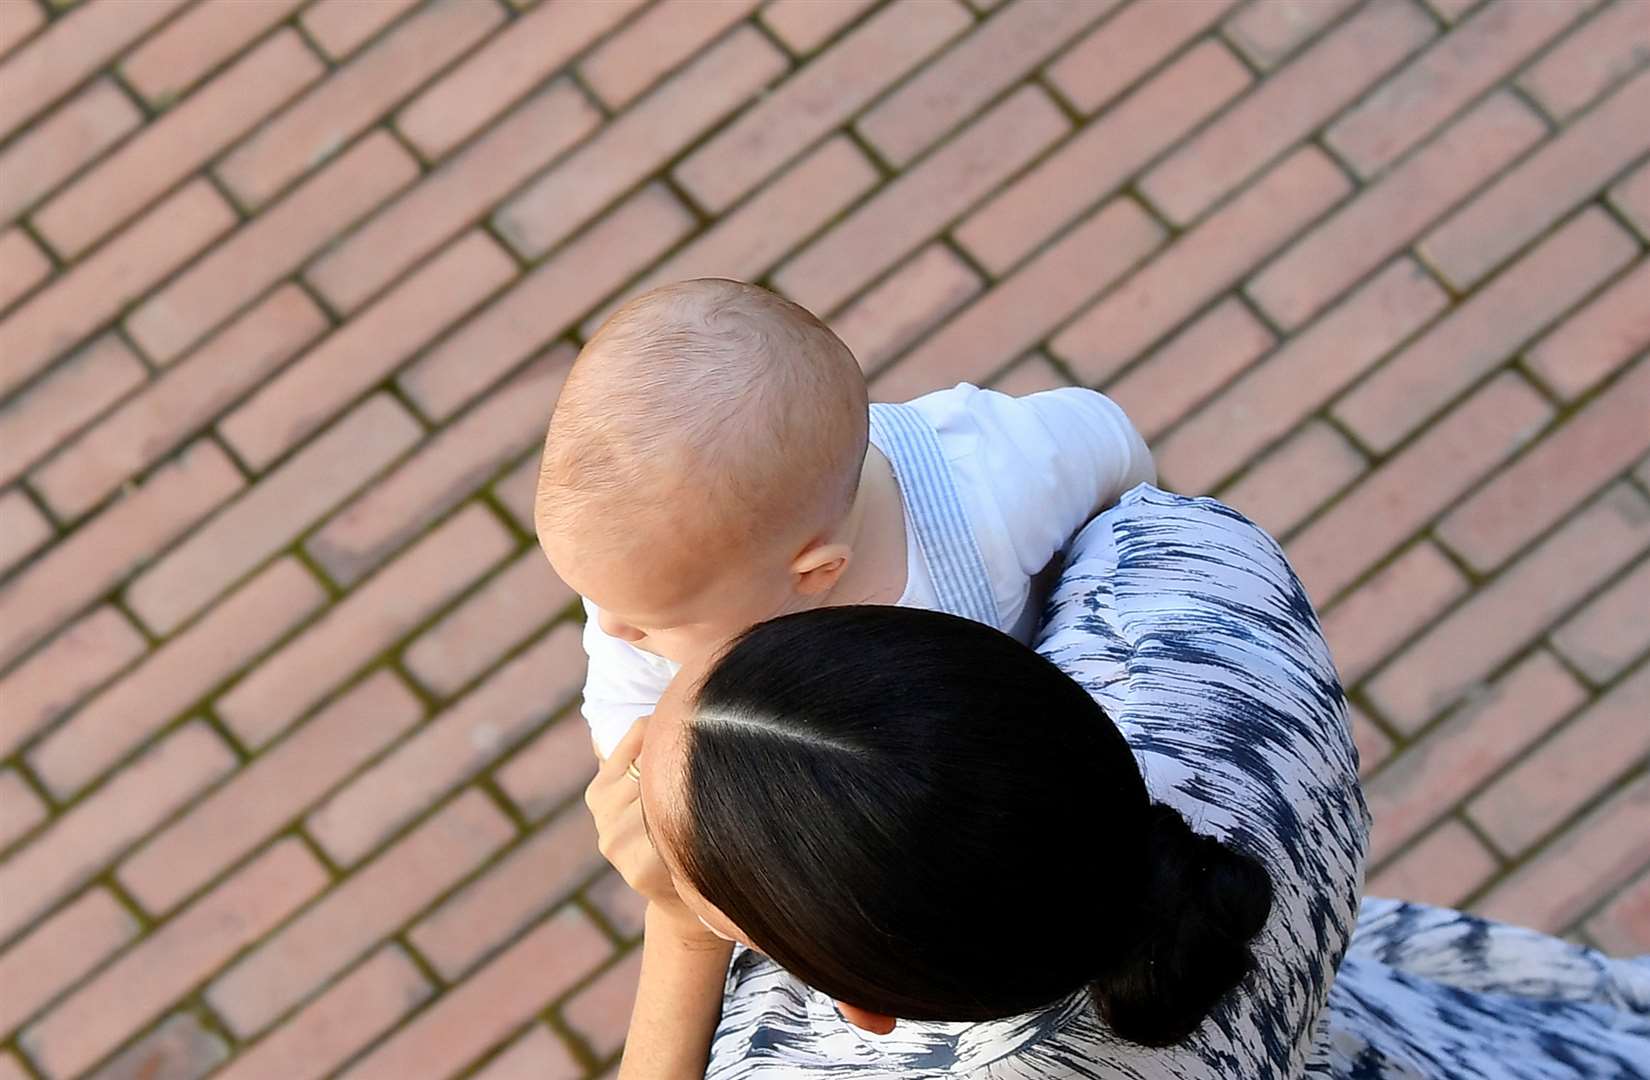 Meghan holding Archie in South Africa (Toby Melville/PA)